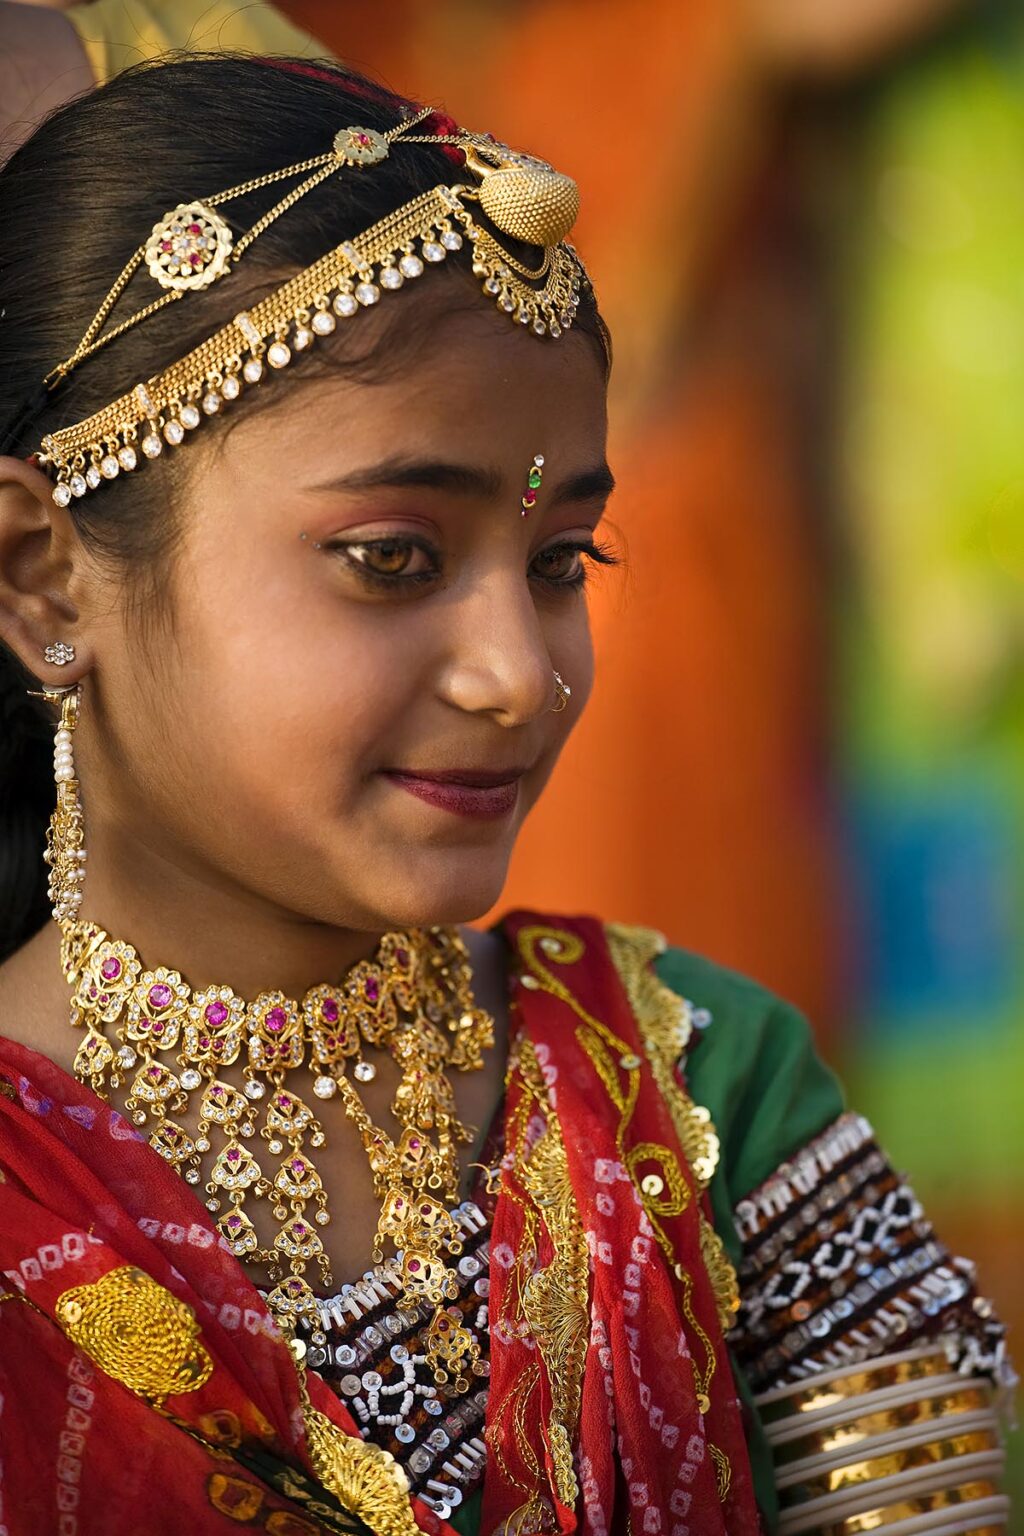 A Rajasthani girl dressed in her finest clothing and jewelry to celebrate the GANGUR FESTIVAL also know as the MEWAR FESTIVAL - UDAIPUR, RAJASTHAN, INDIA